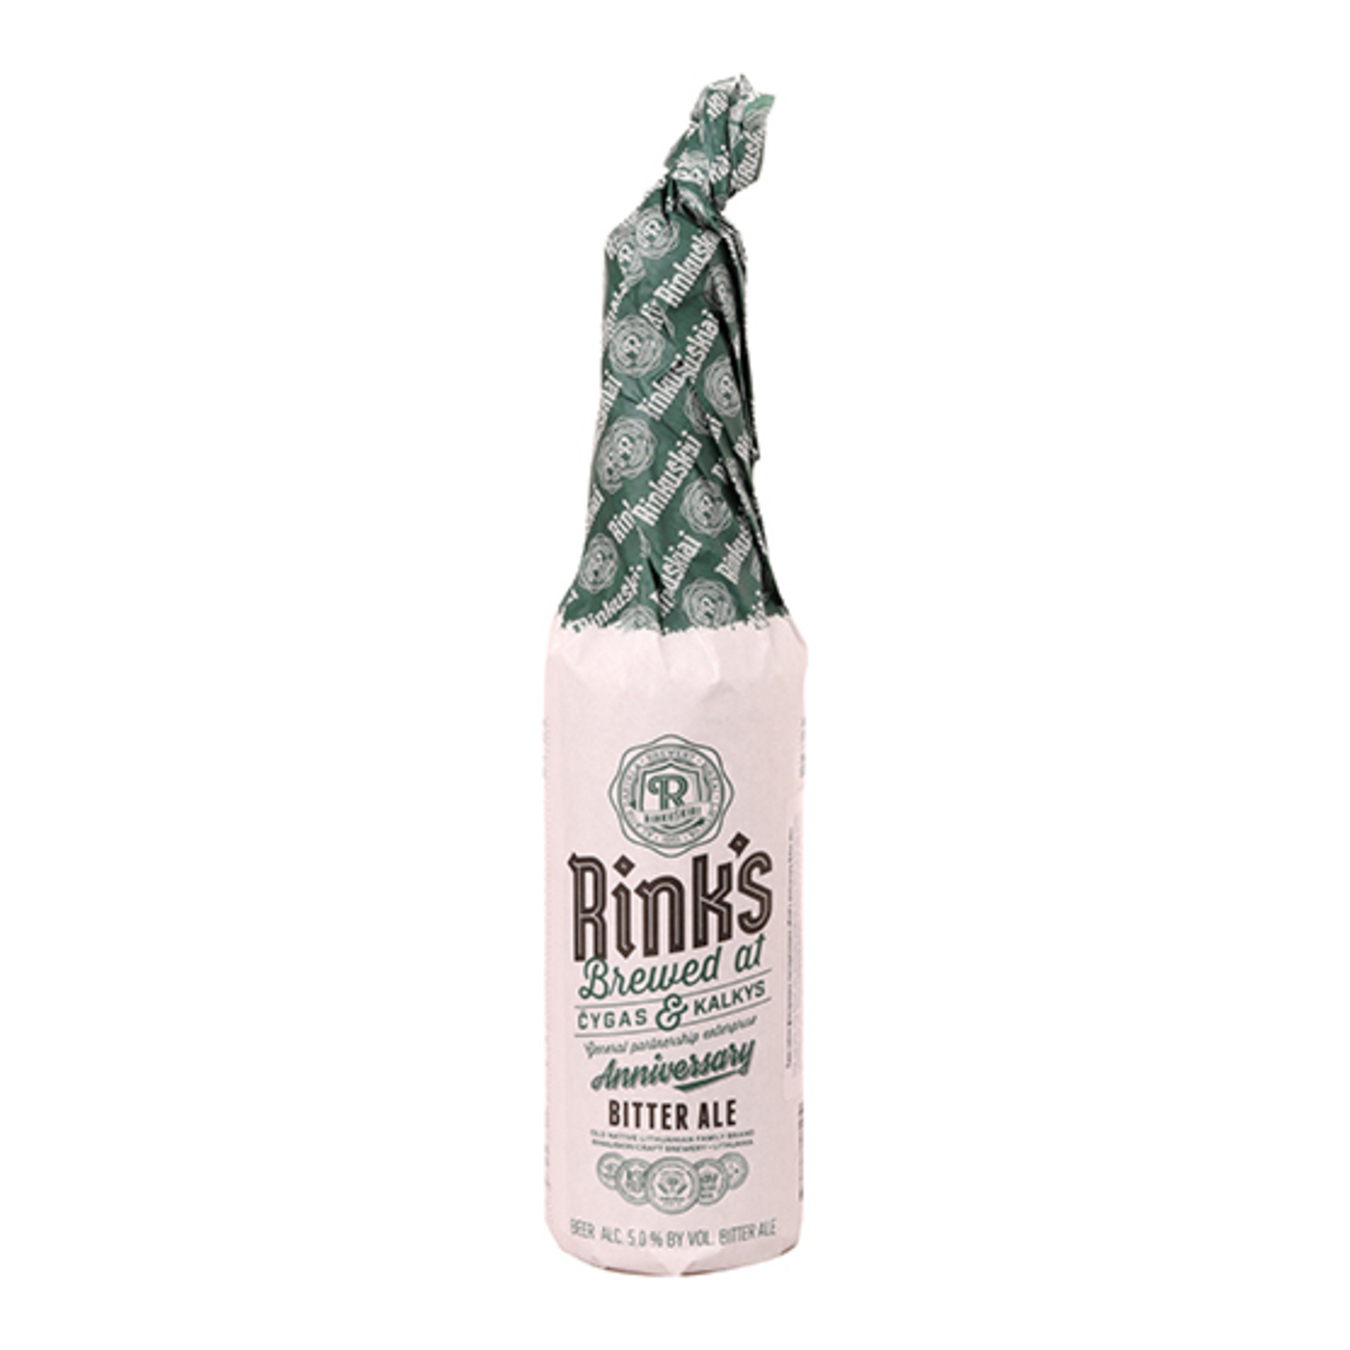 Rink's Аnniversary Bitter ale light beer 5% 0,33l